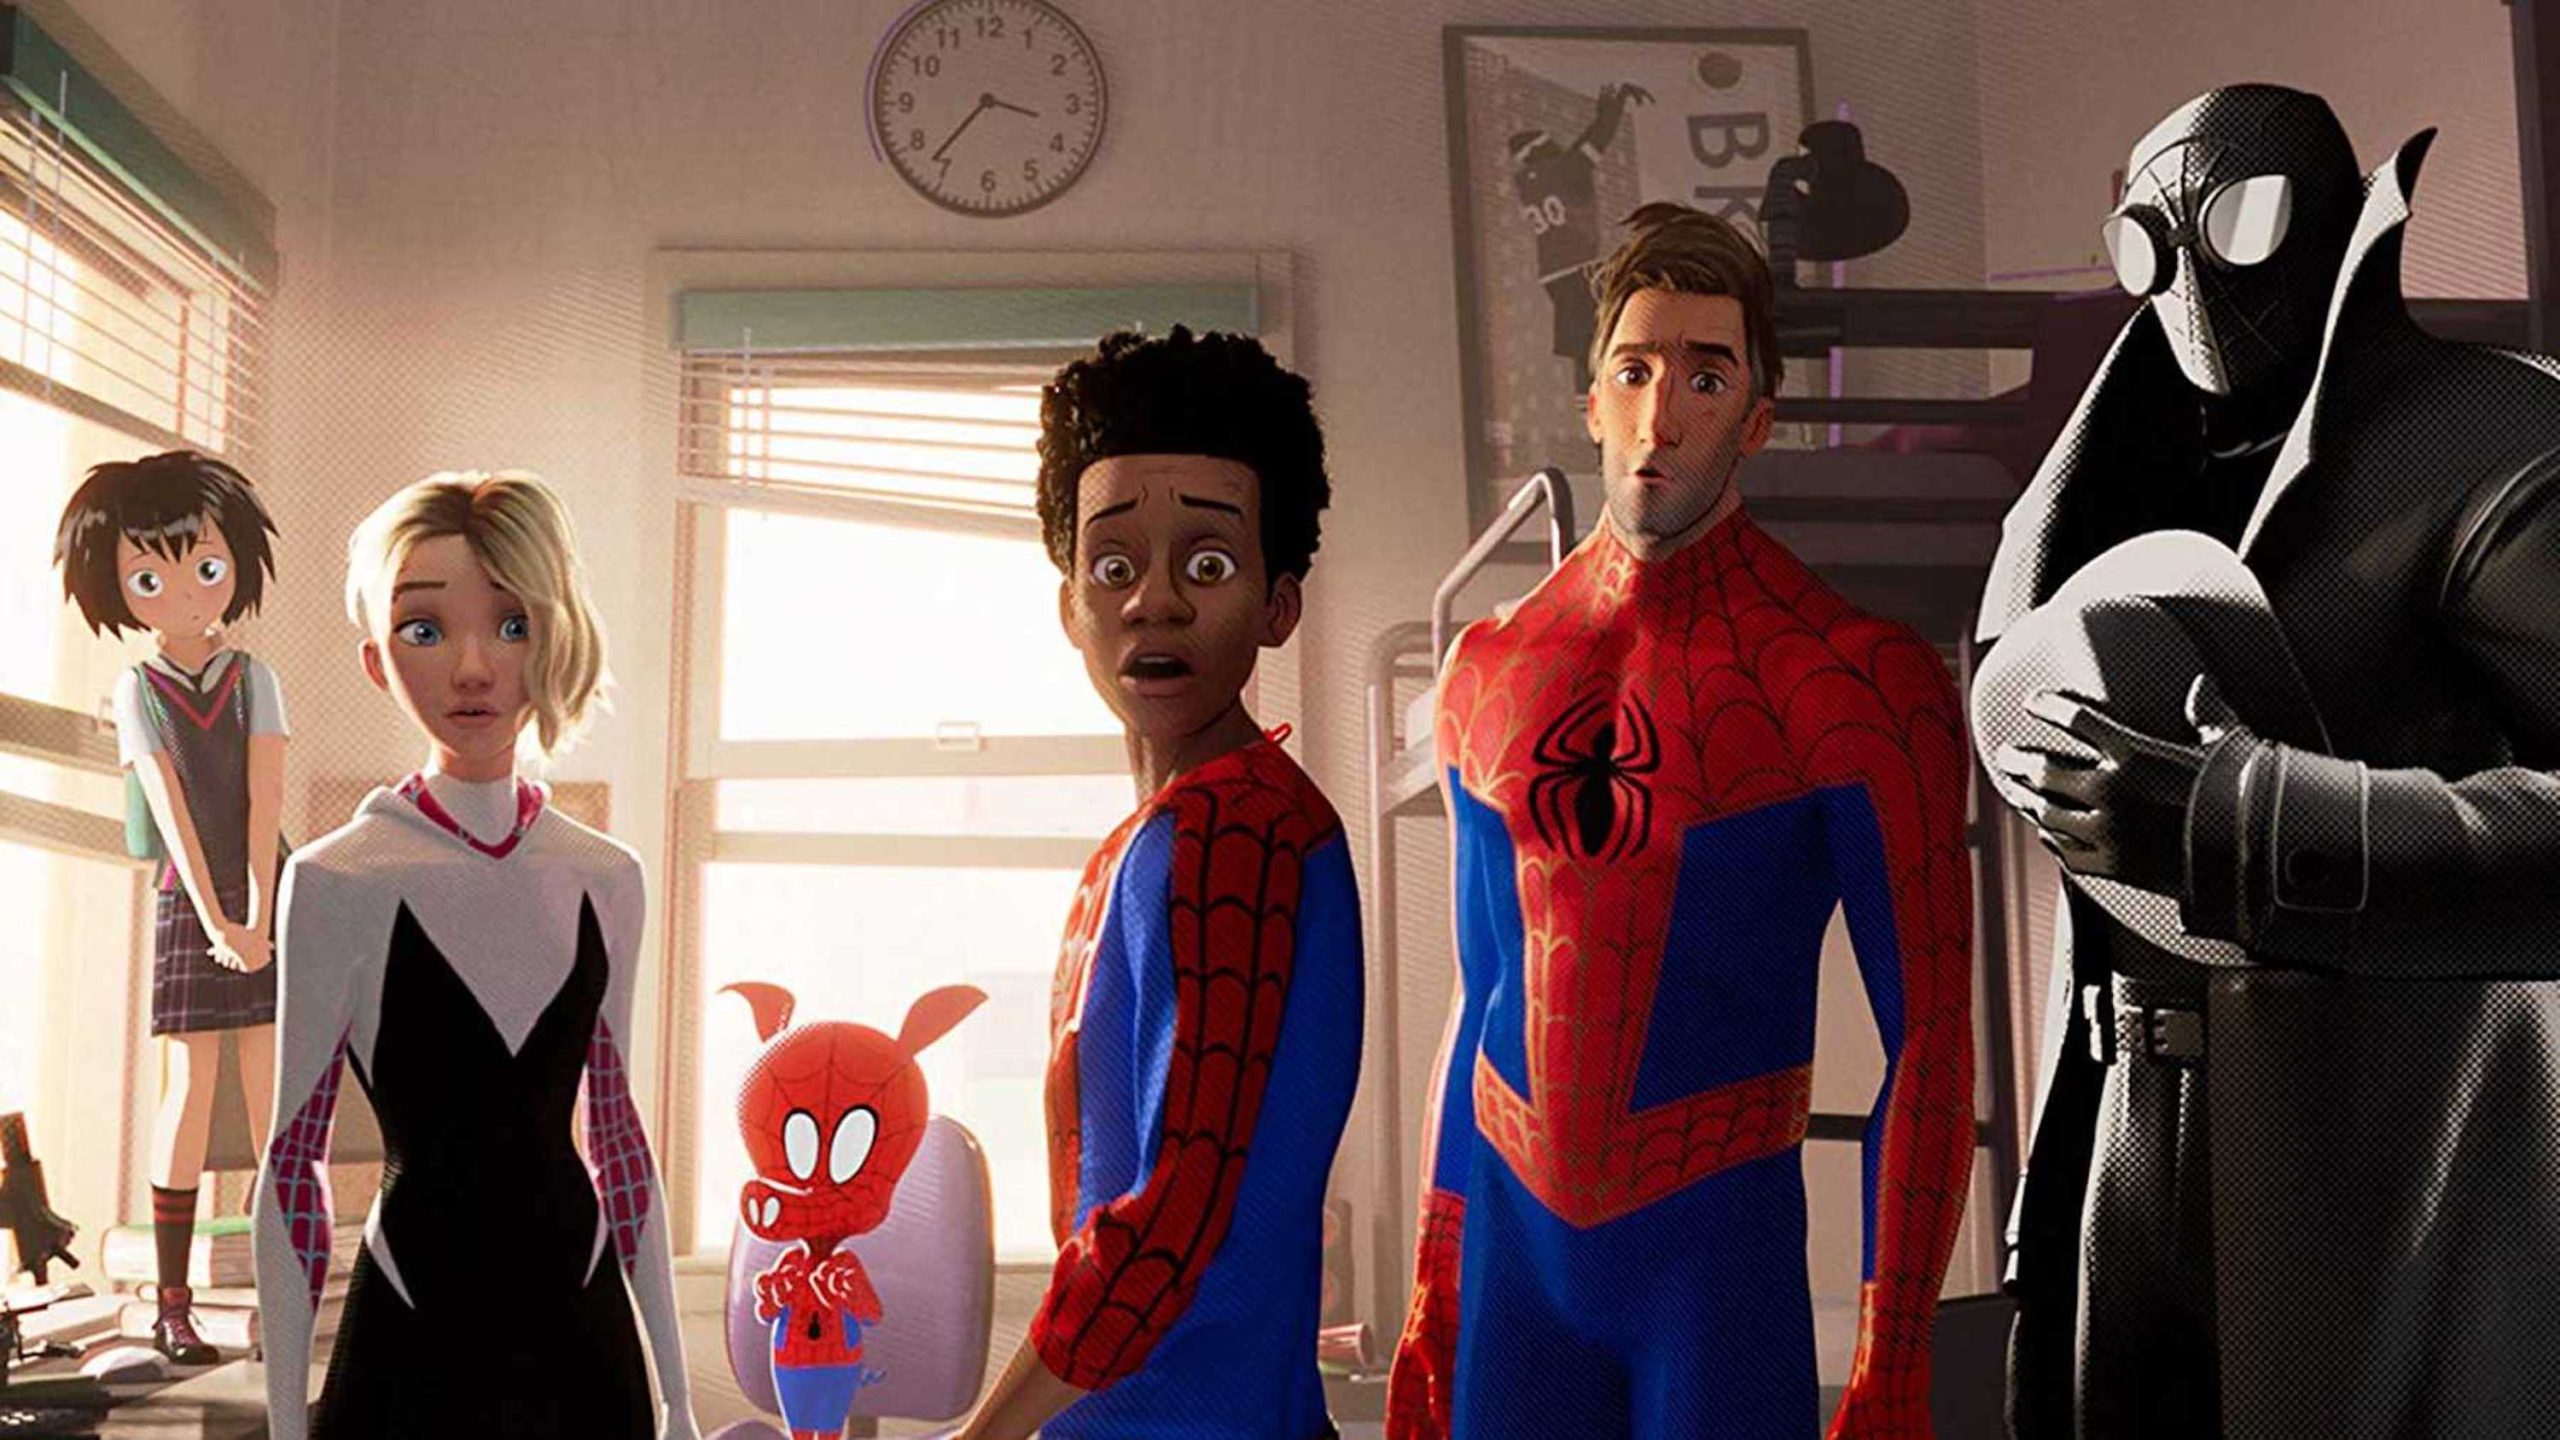 This image is from Spider-Man: Into the Spider-Verse (2018), where the Spider-Man family hears someone at Miles' dorm room door. 